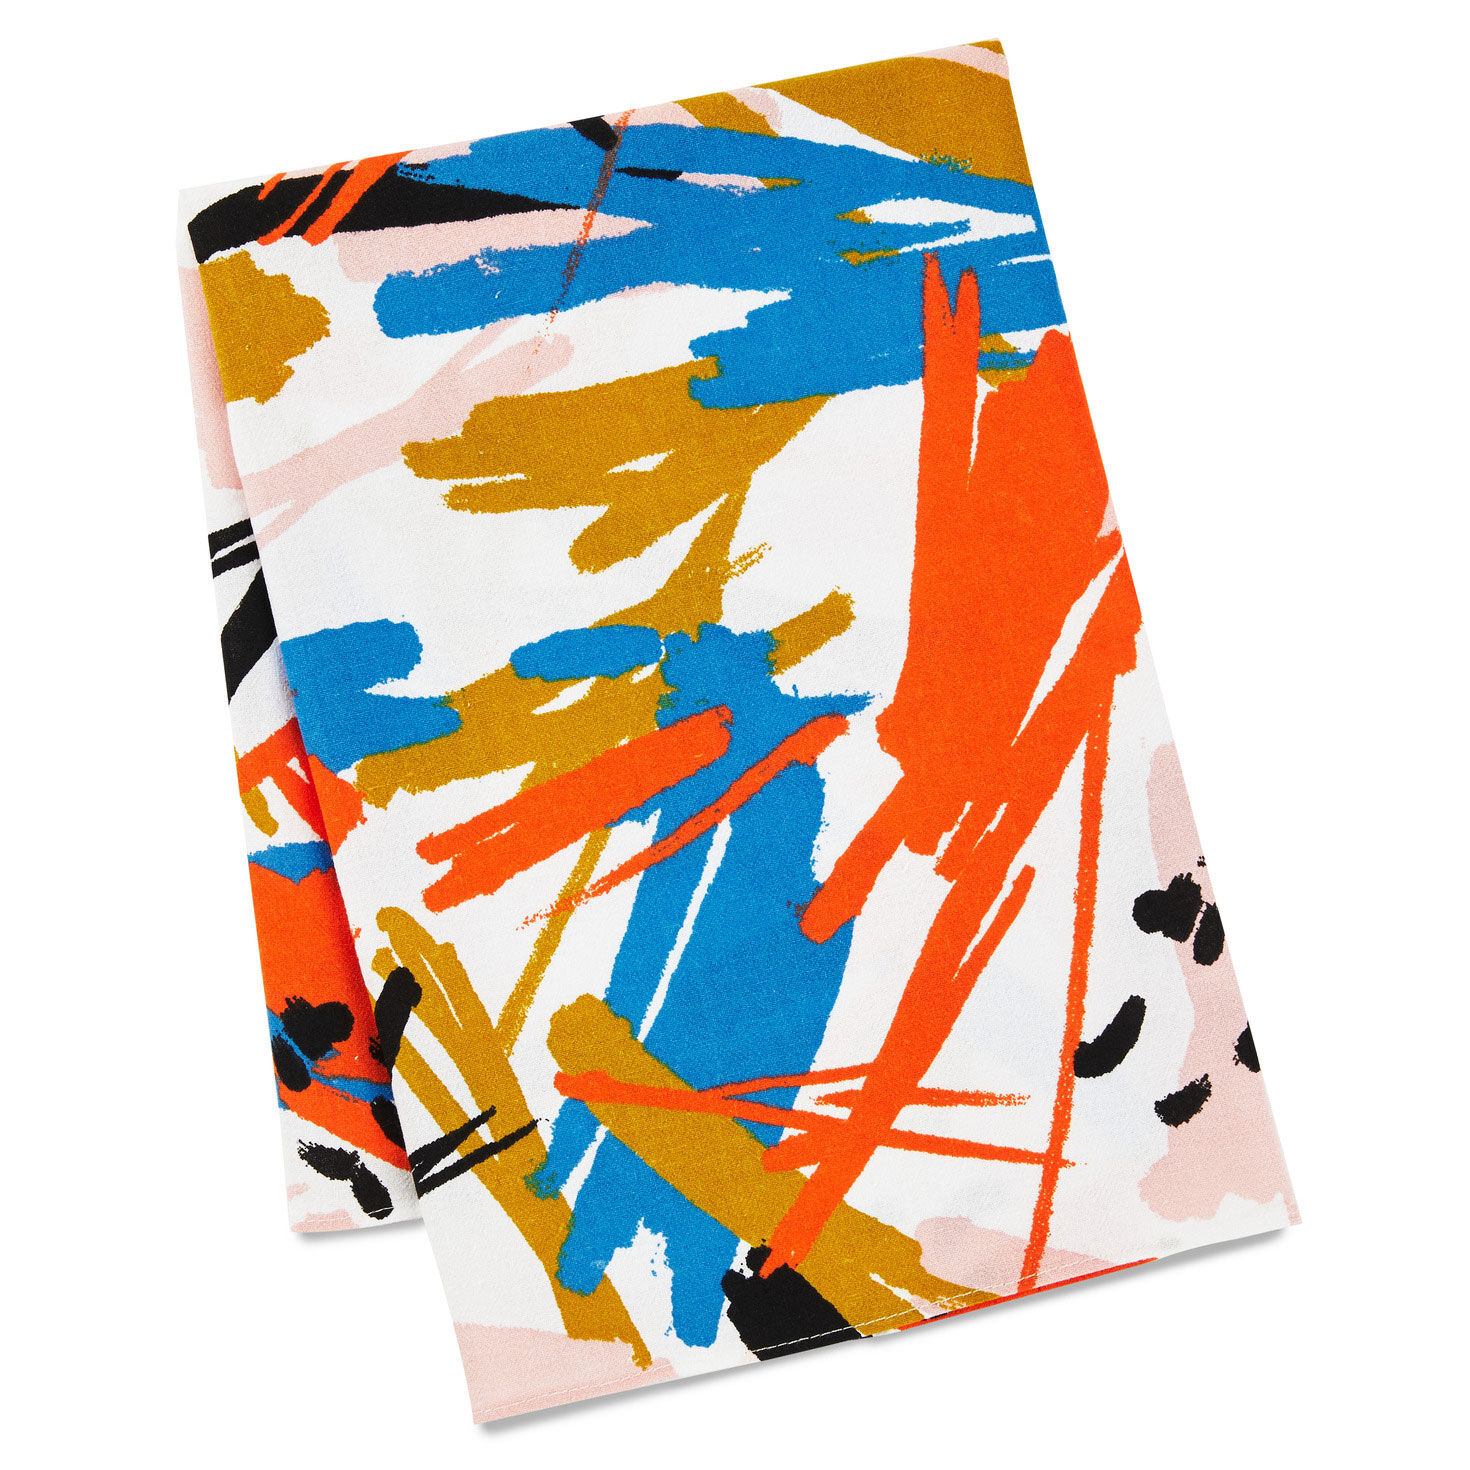 26" Abstract Doodles on Cream Fabric Gift Wrap for only USD 12.99 | Hallmark